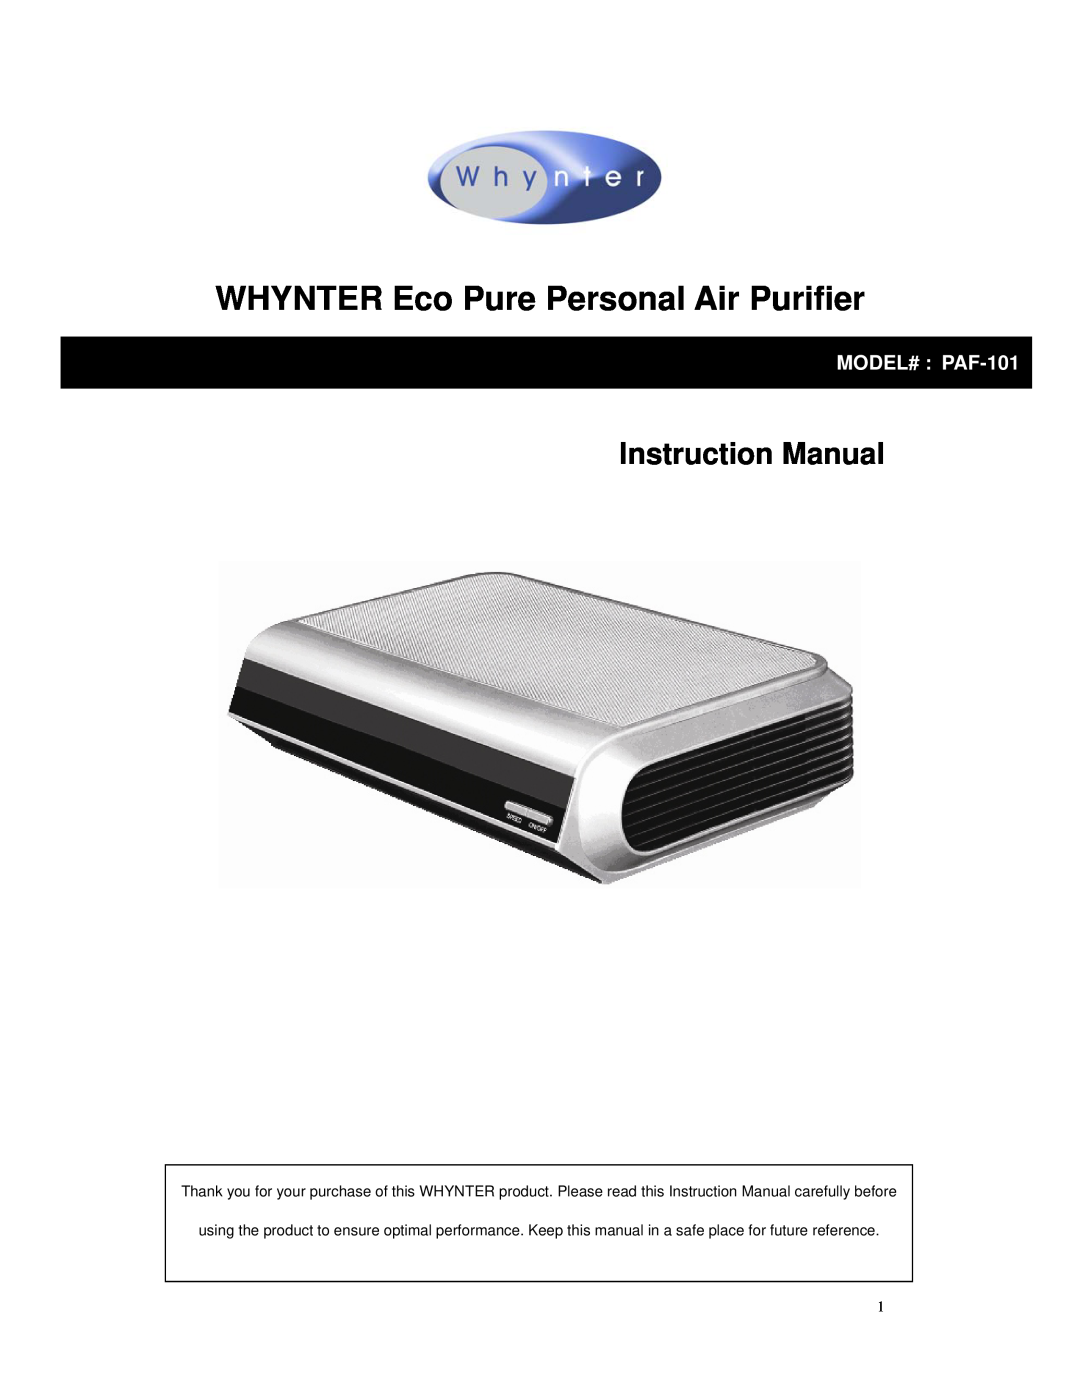 Whynter instruction manual WHYNTER Eco Pure Personal Air Purifier, MODEL# PAF-101 